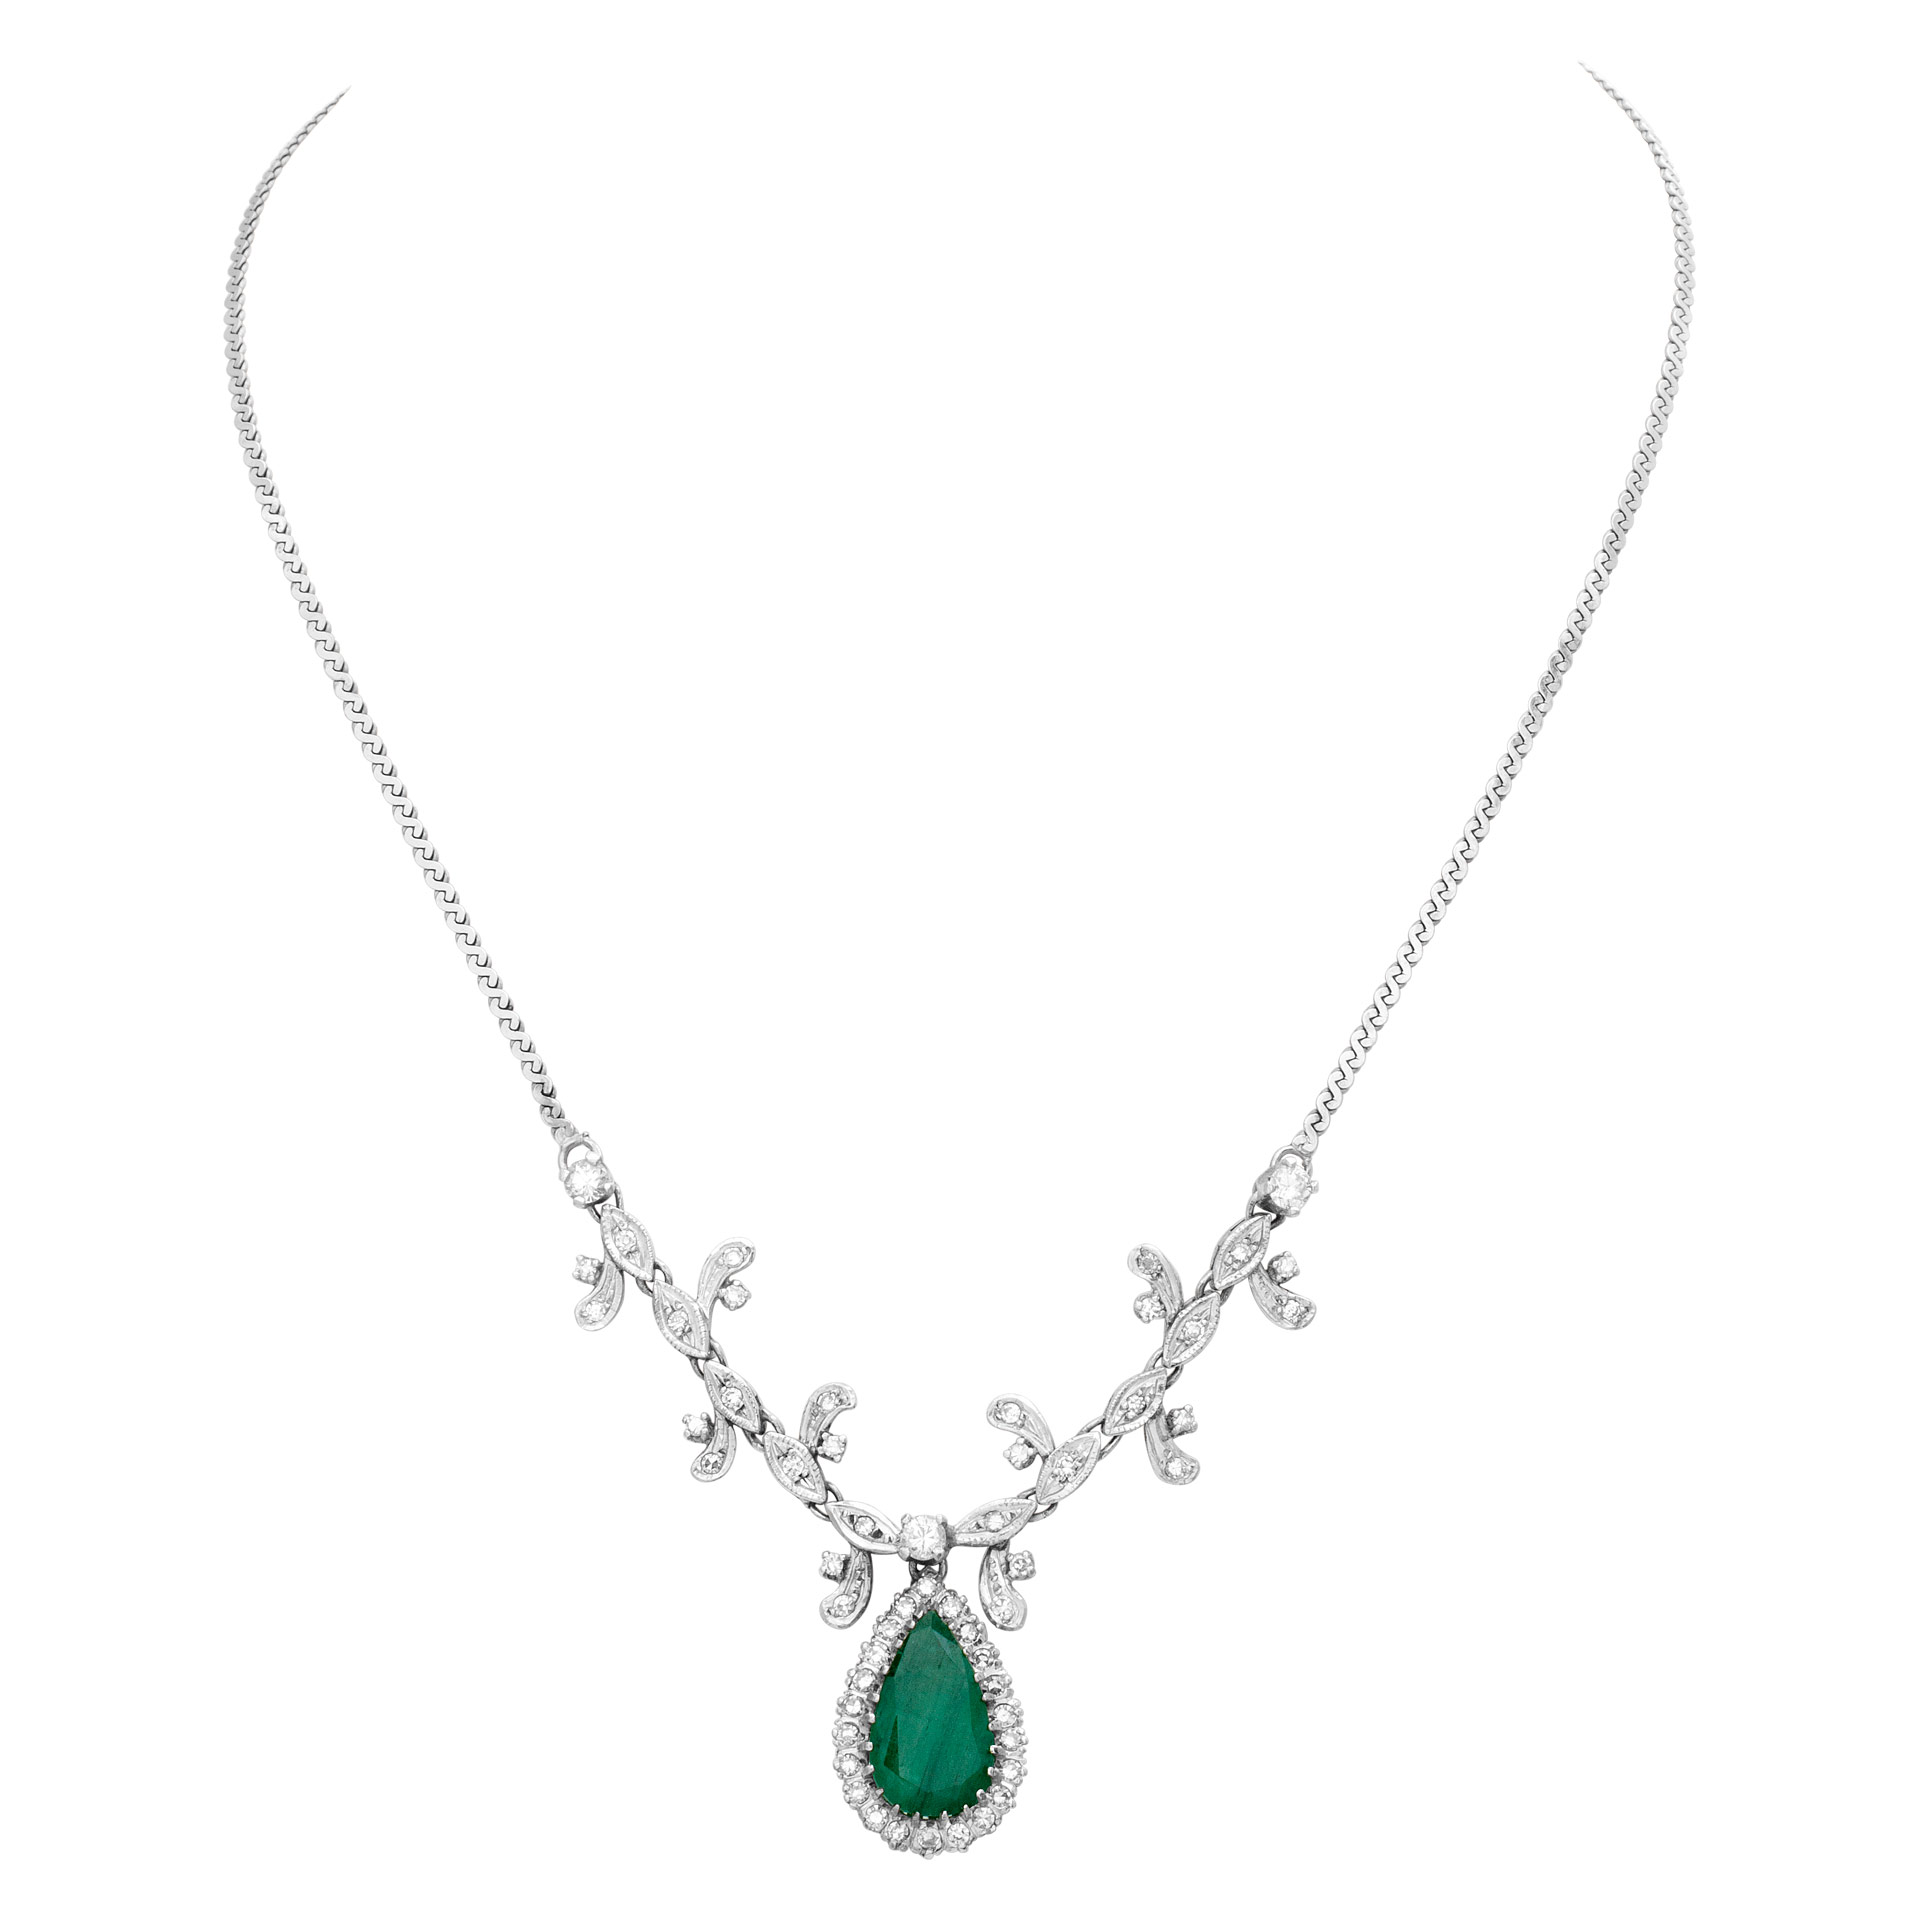 Teardrop Emerald necklace with diamonds set in 18k white gold.